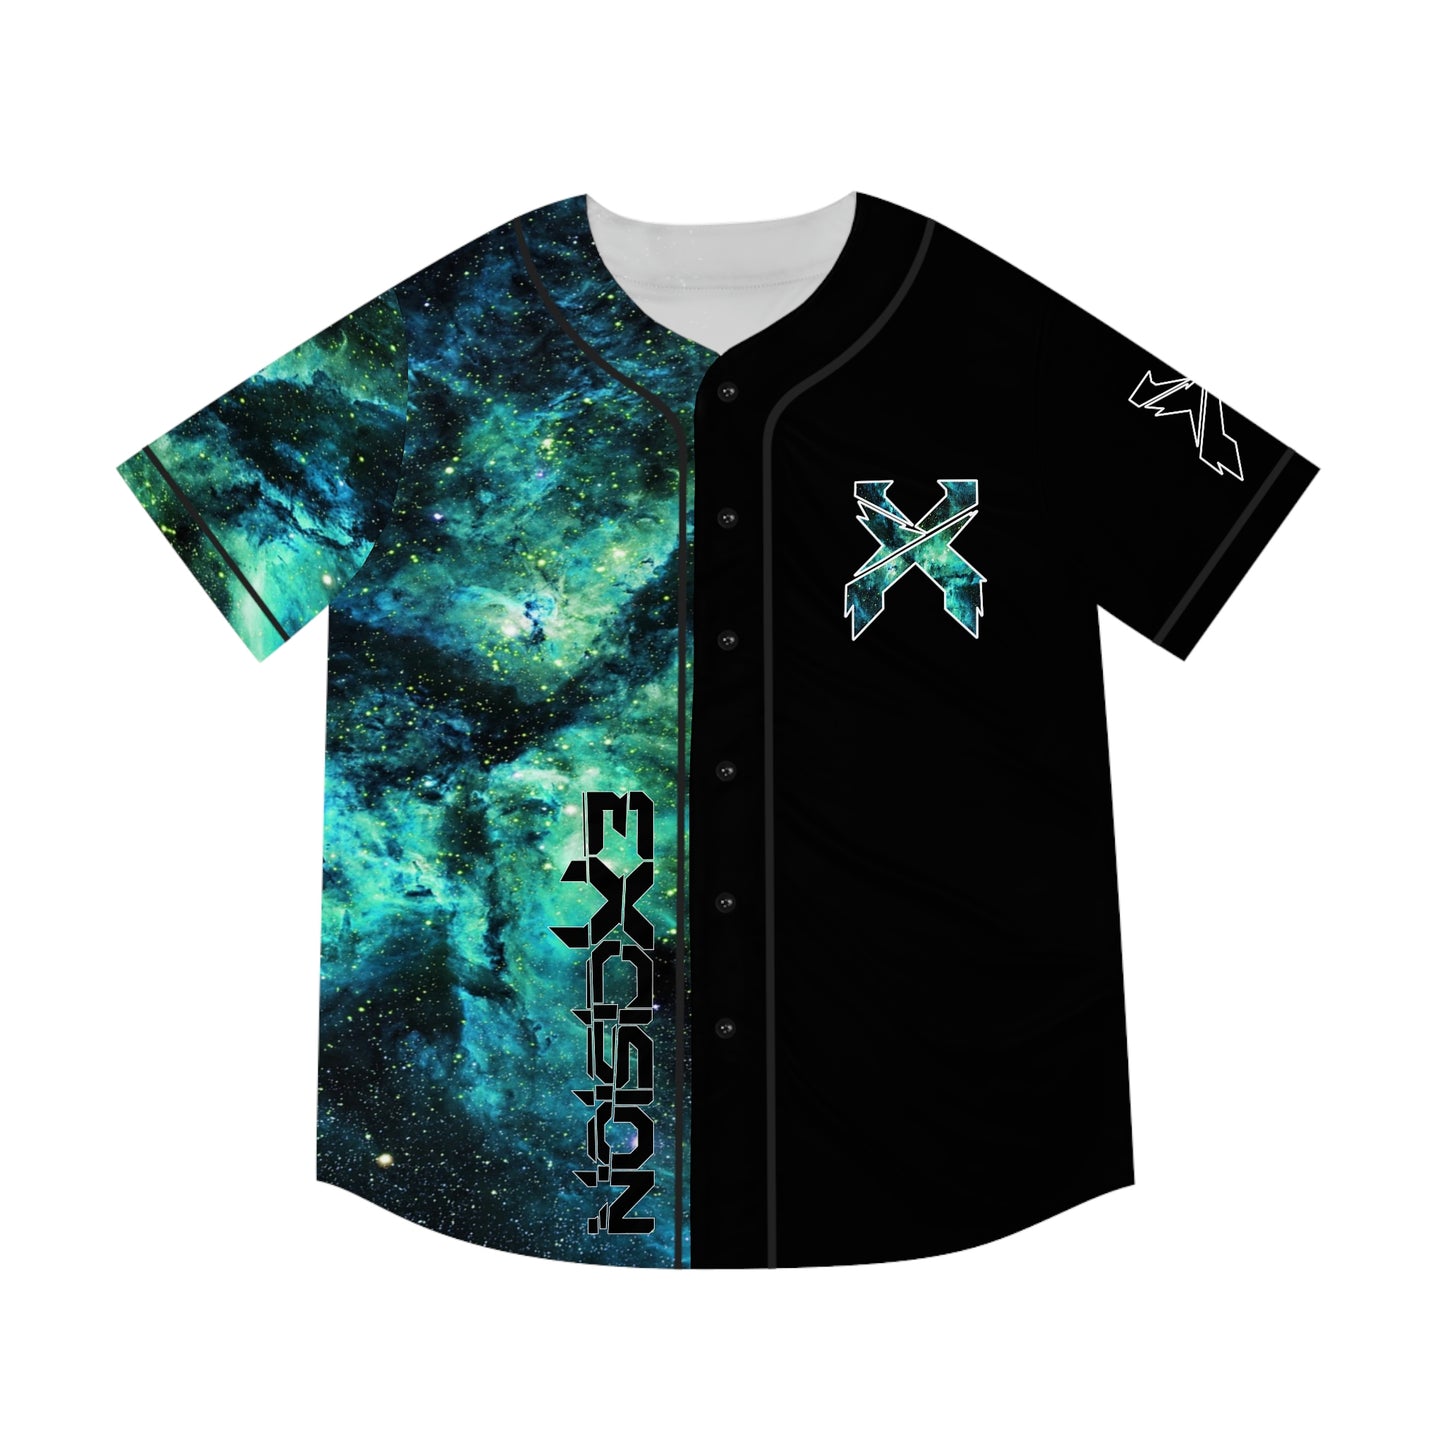 Excision Jersey (Blue/Green Galaxy)